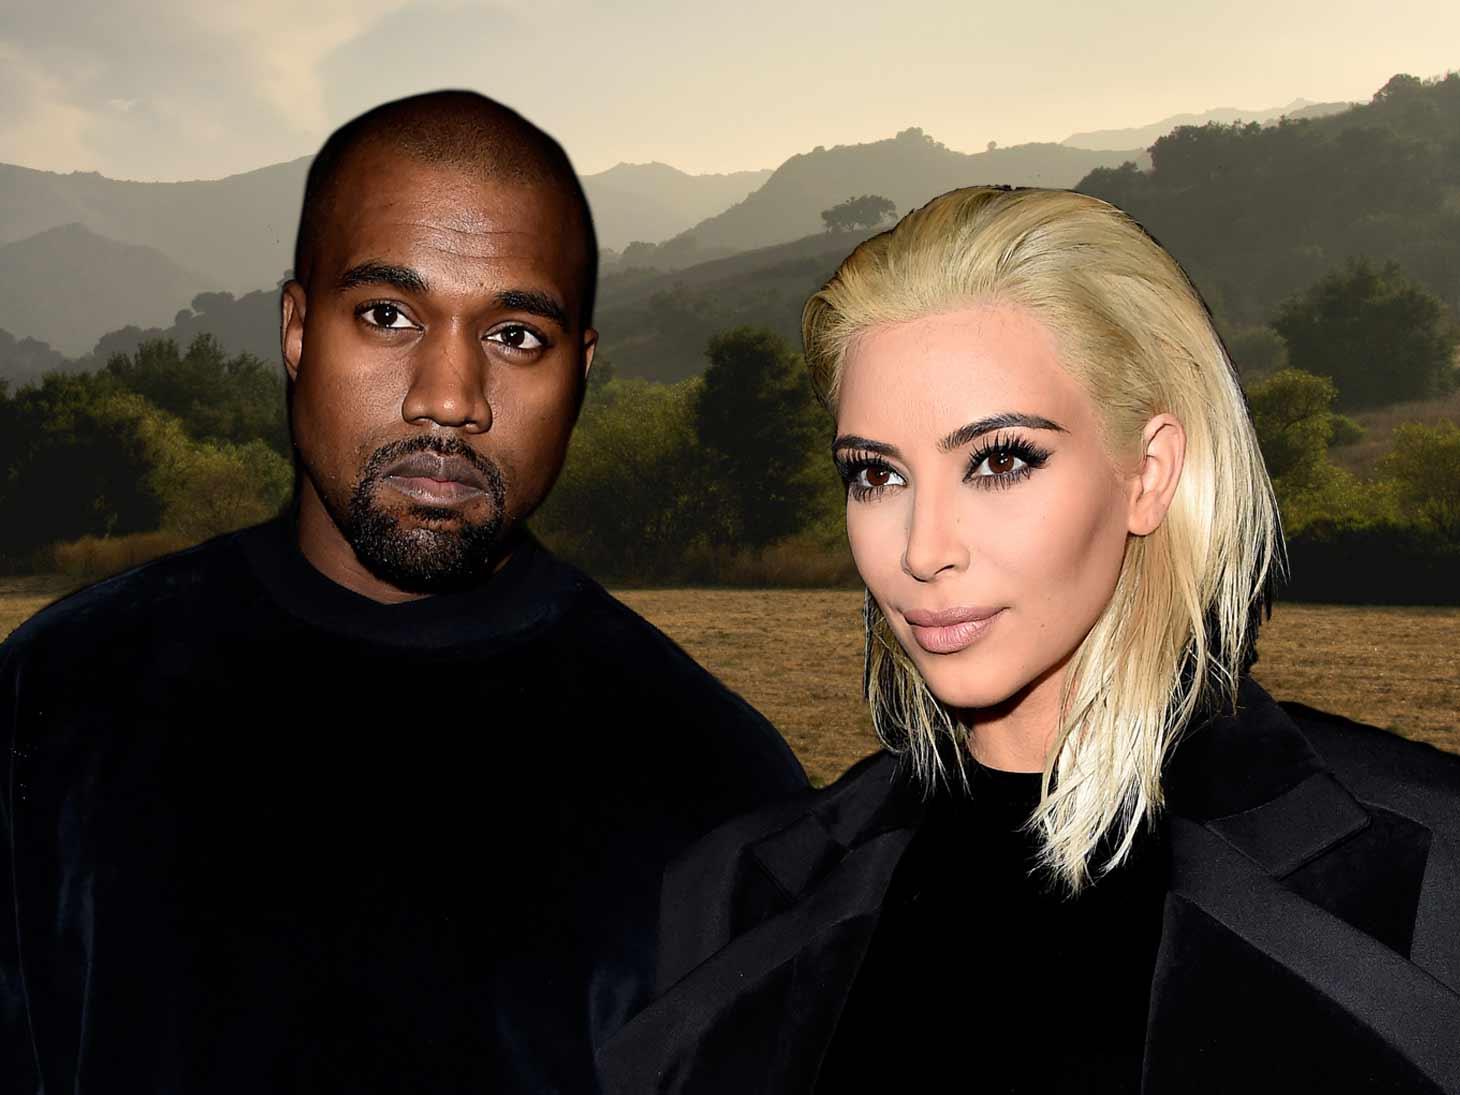 Kanye and Kim Buy Another Home in Los Angeles to Take Over Entire Block in Exclusive Neighborhood